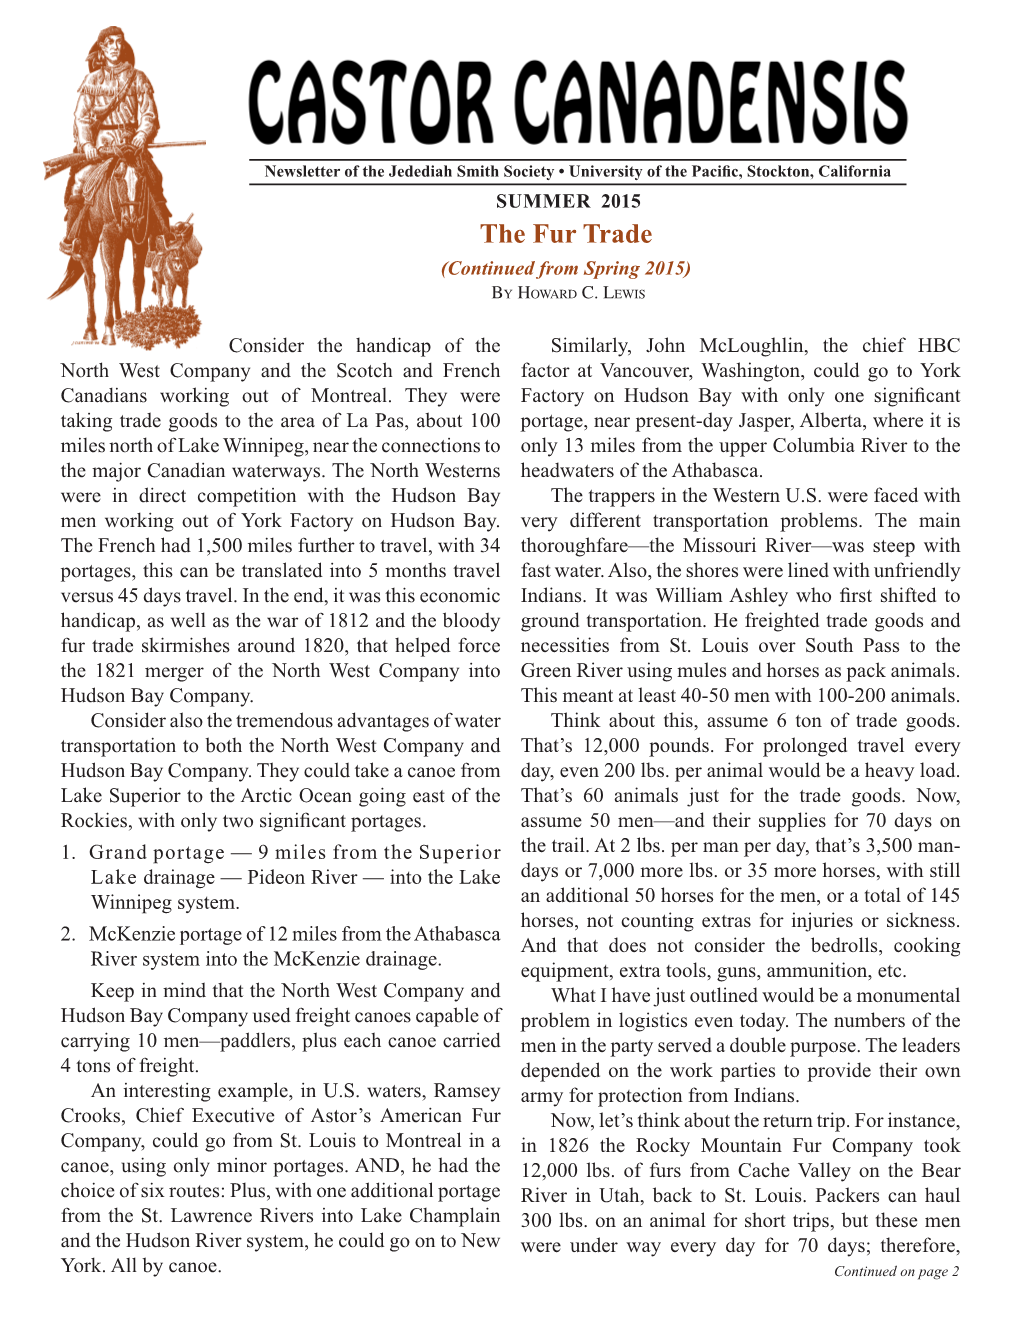 The Fur Trade (Continued from Spring 2015) by Howard C